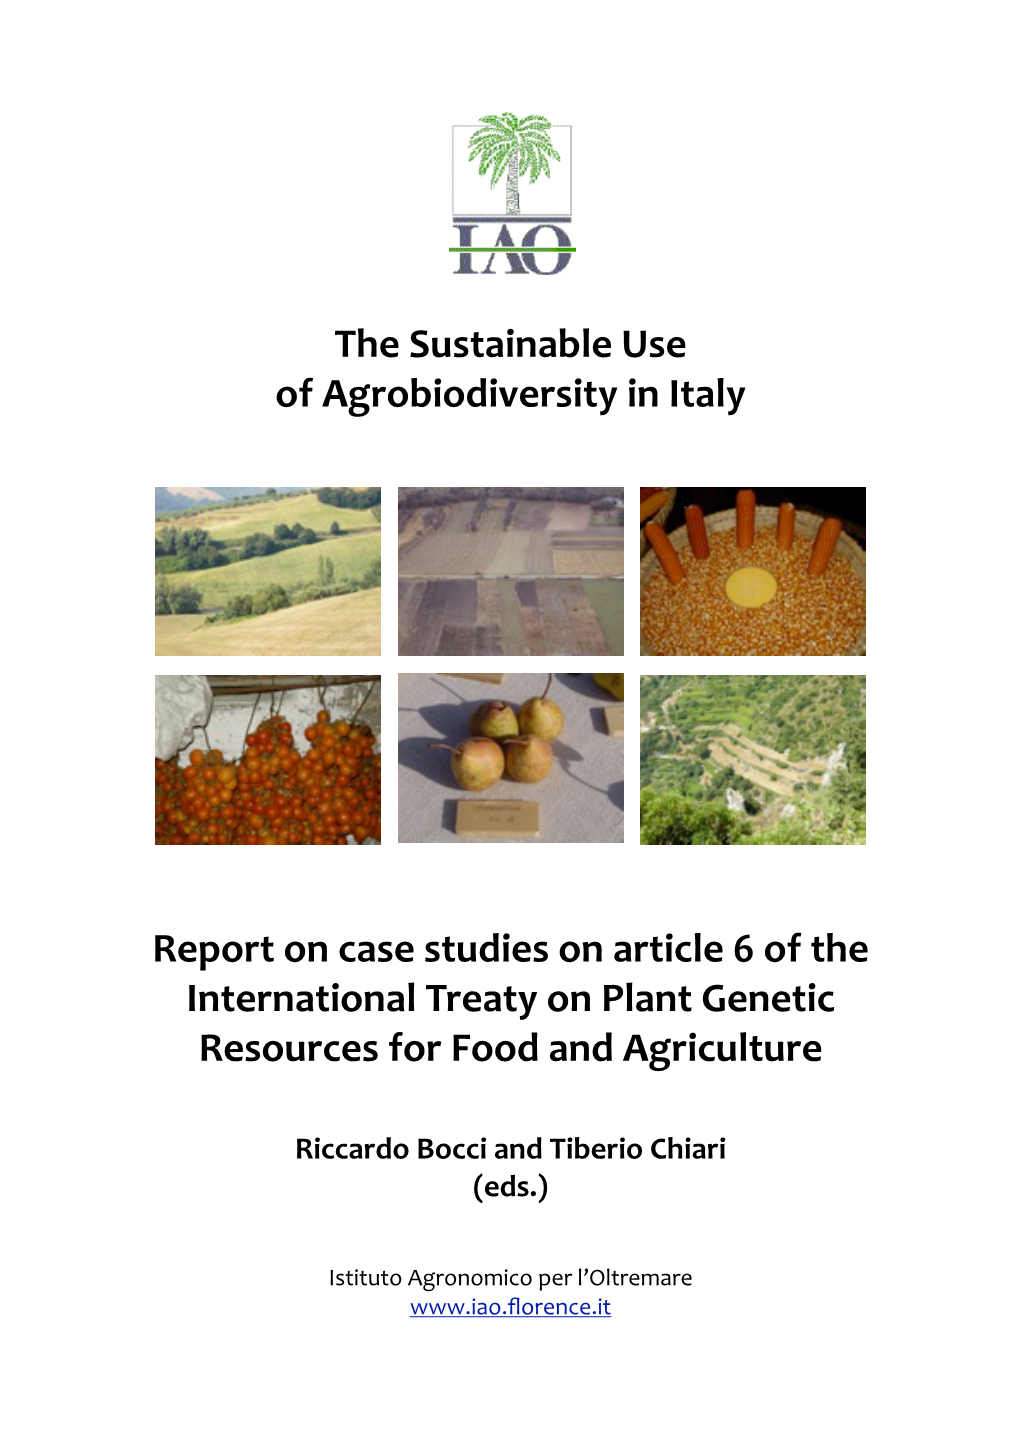 The Sustainable Use of Agrobiodiversity in Italy Report on Case Studies on Article 6 of the Inte